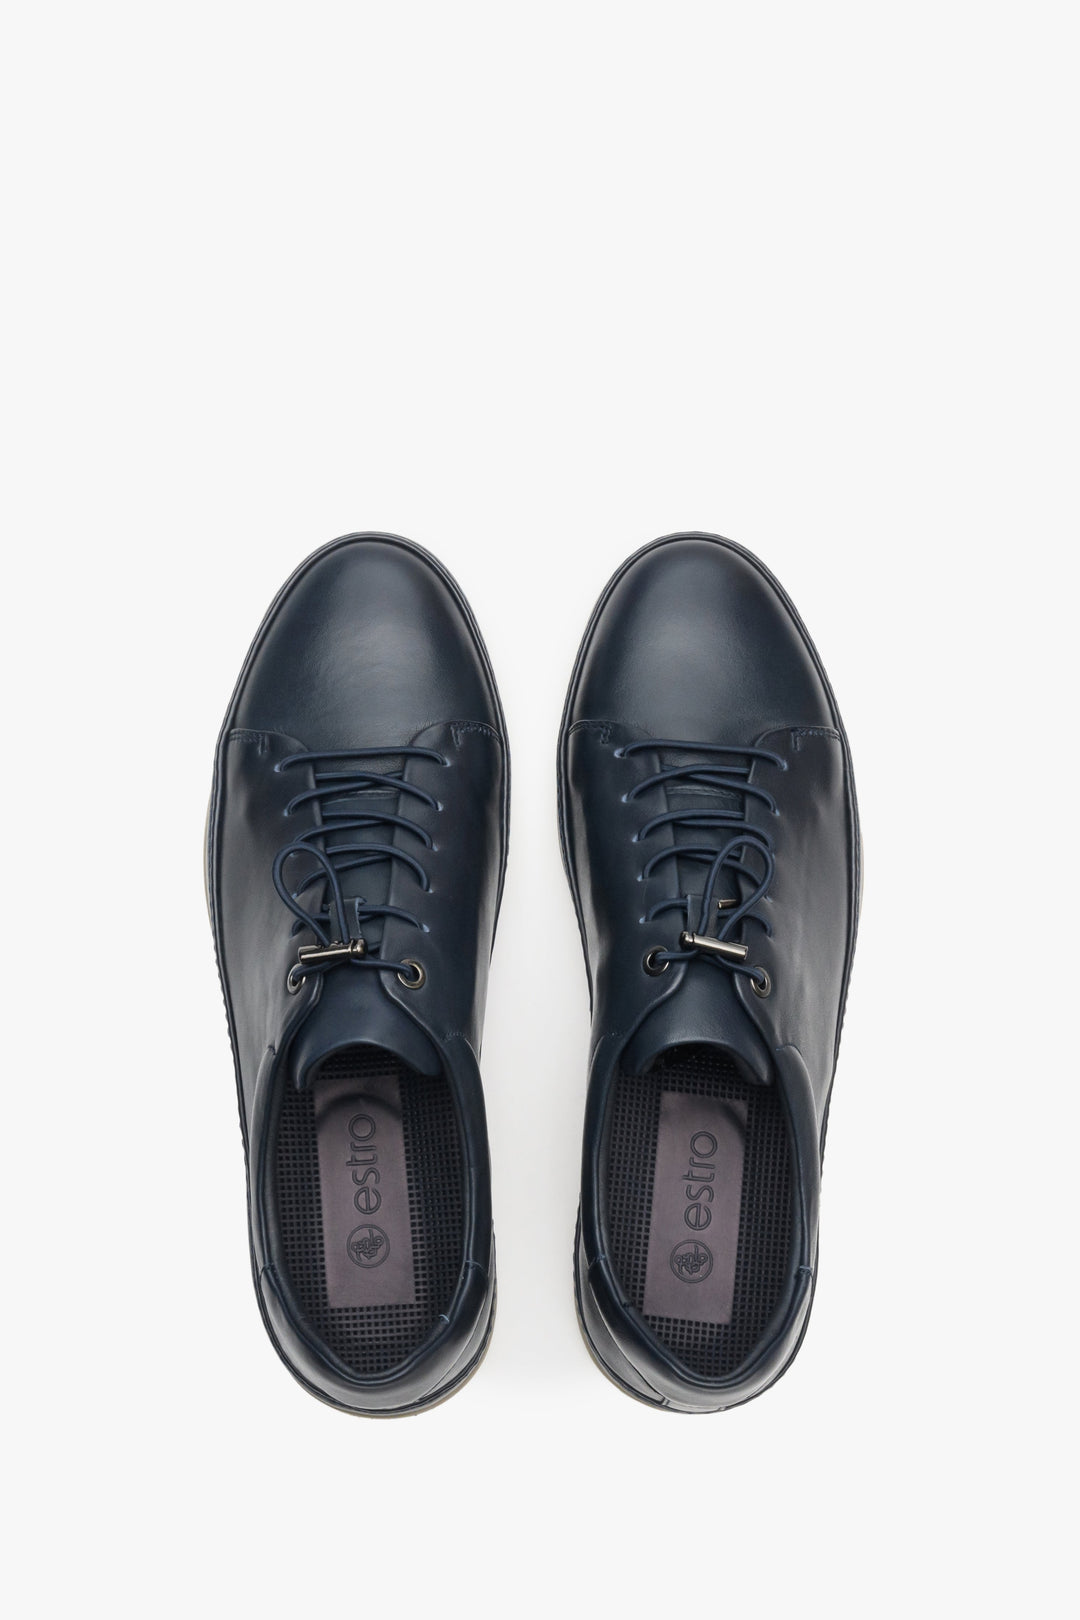 Men's navy blue sneakers made of genuine leather - top view model presentation.